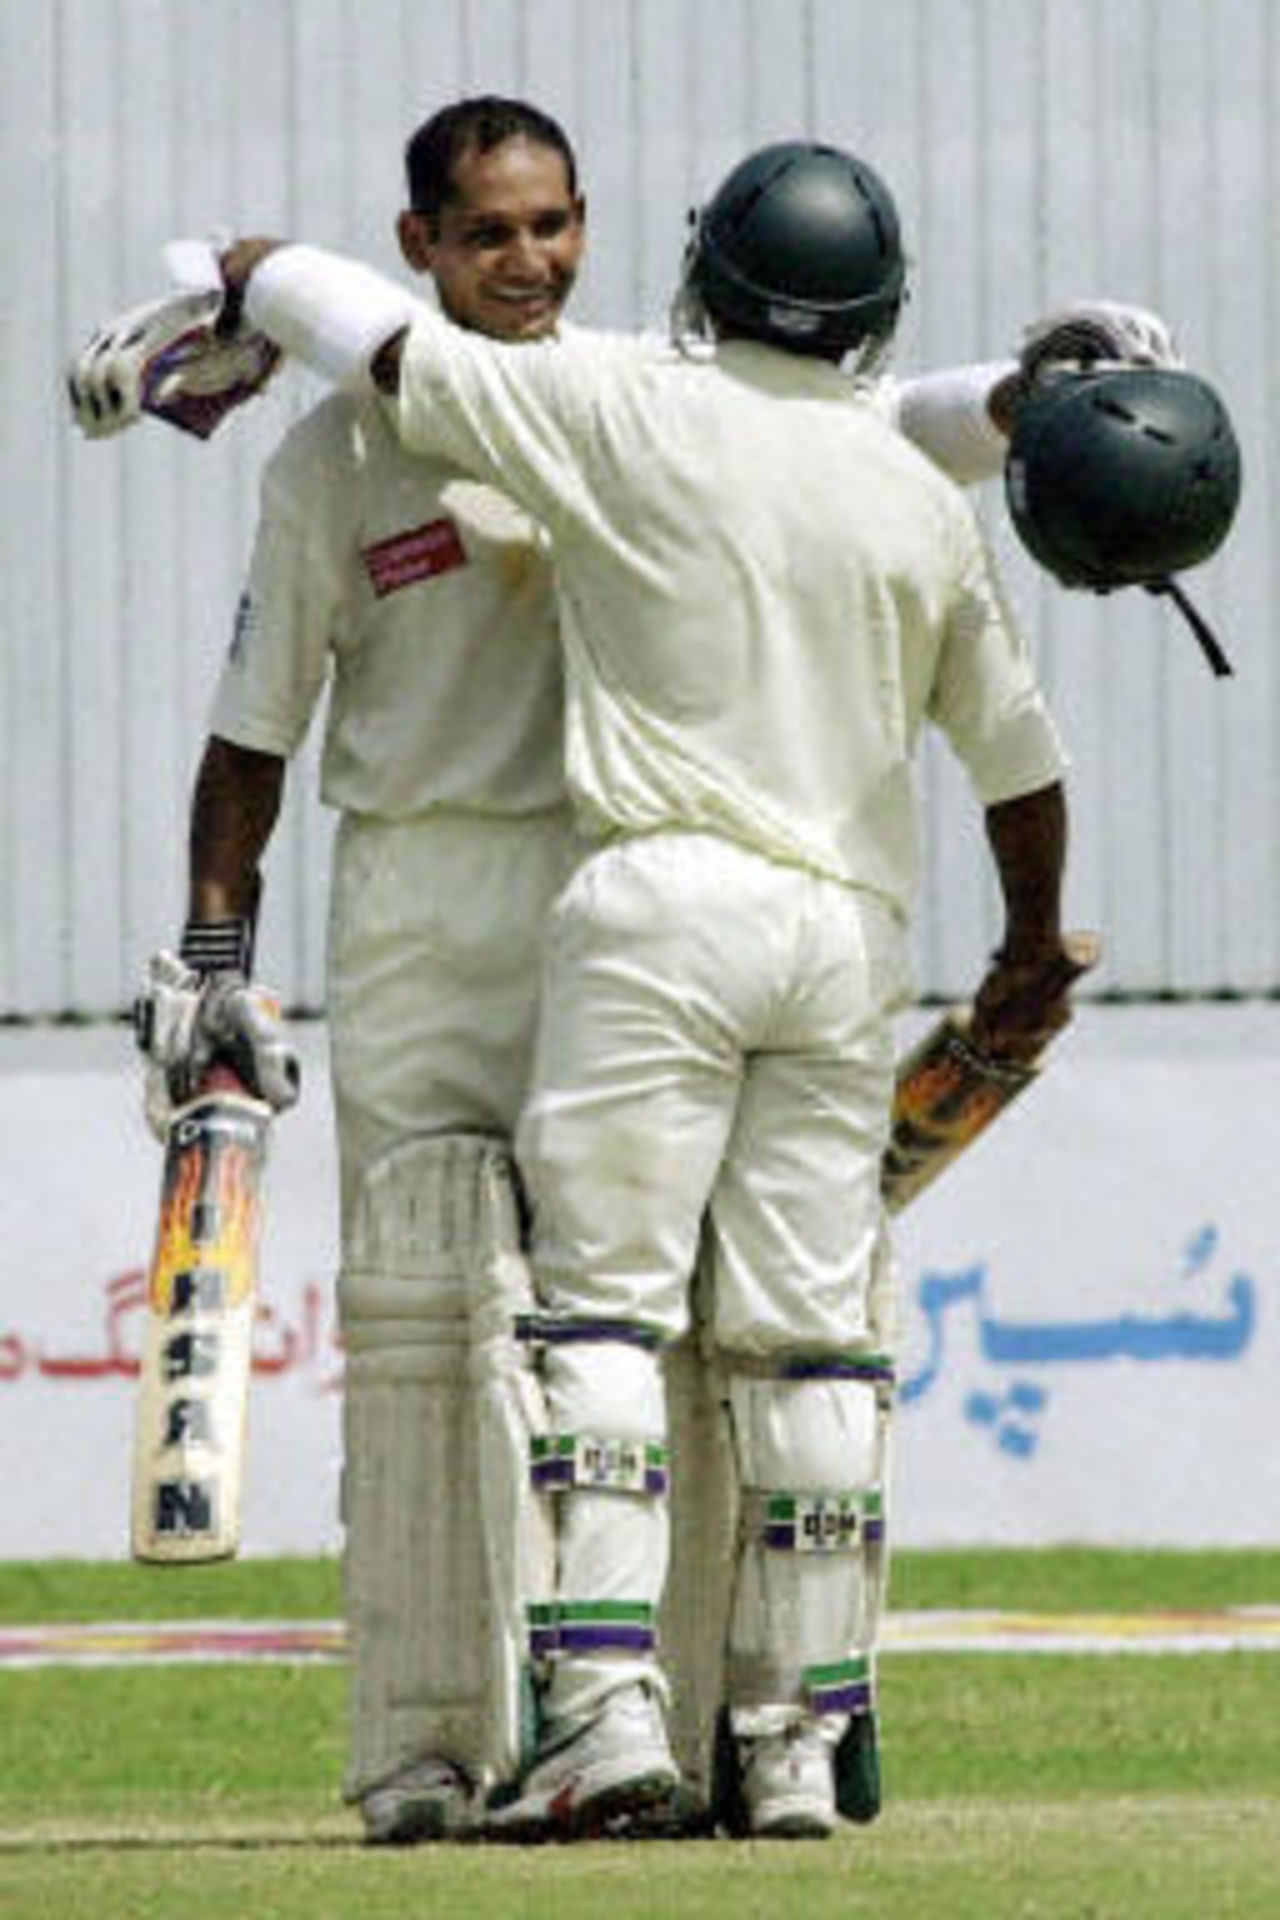 Habibul Bashar (L) is congratulated by Rajin Saleh (R) after compeleting his century during the fourth day of the first Test match between Pakistan and Bangladesh in Karachi, 23 August 2003.